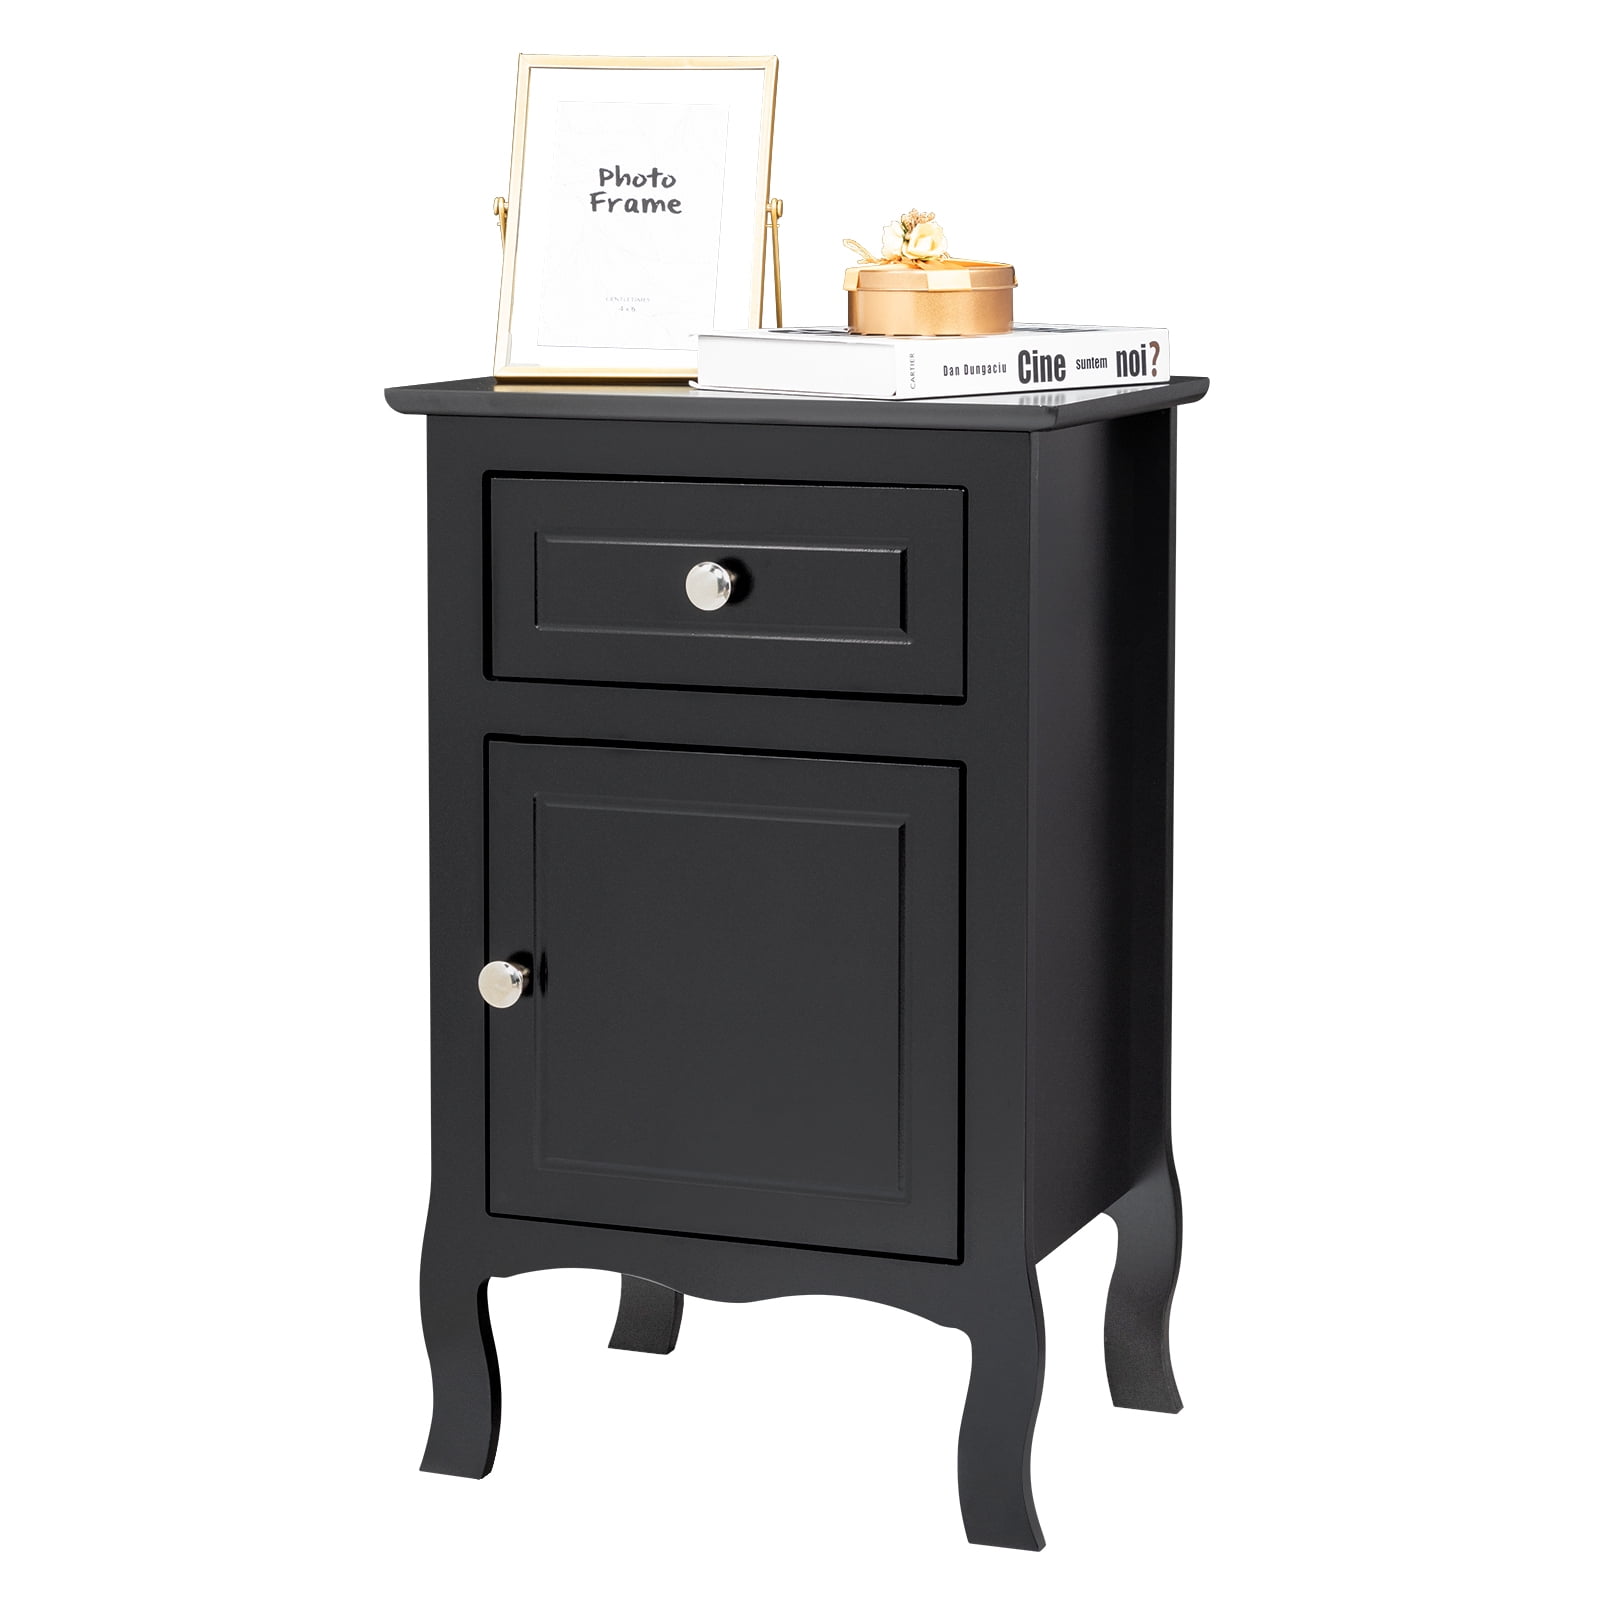 HUGO Small Drawer Nightstand - Black Solid European Birch, Fully Assembled,  Floor Standing or Wall Mounted, Environment-Friendly Black Oil Finish -  Woodek Design